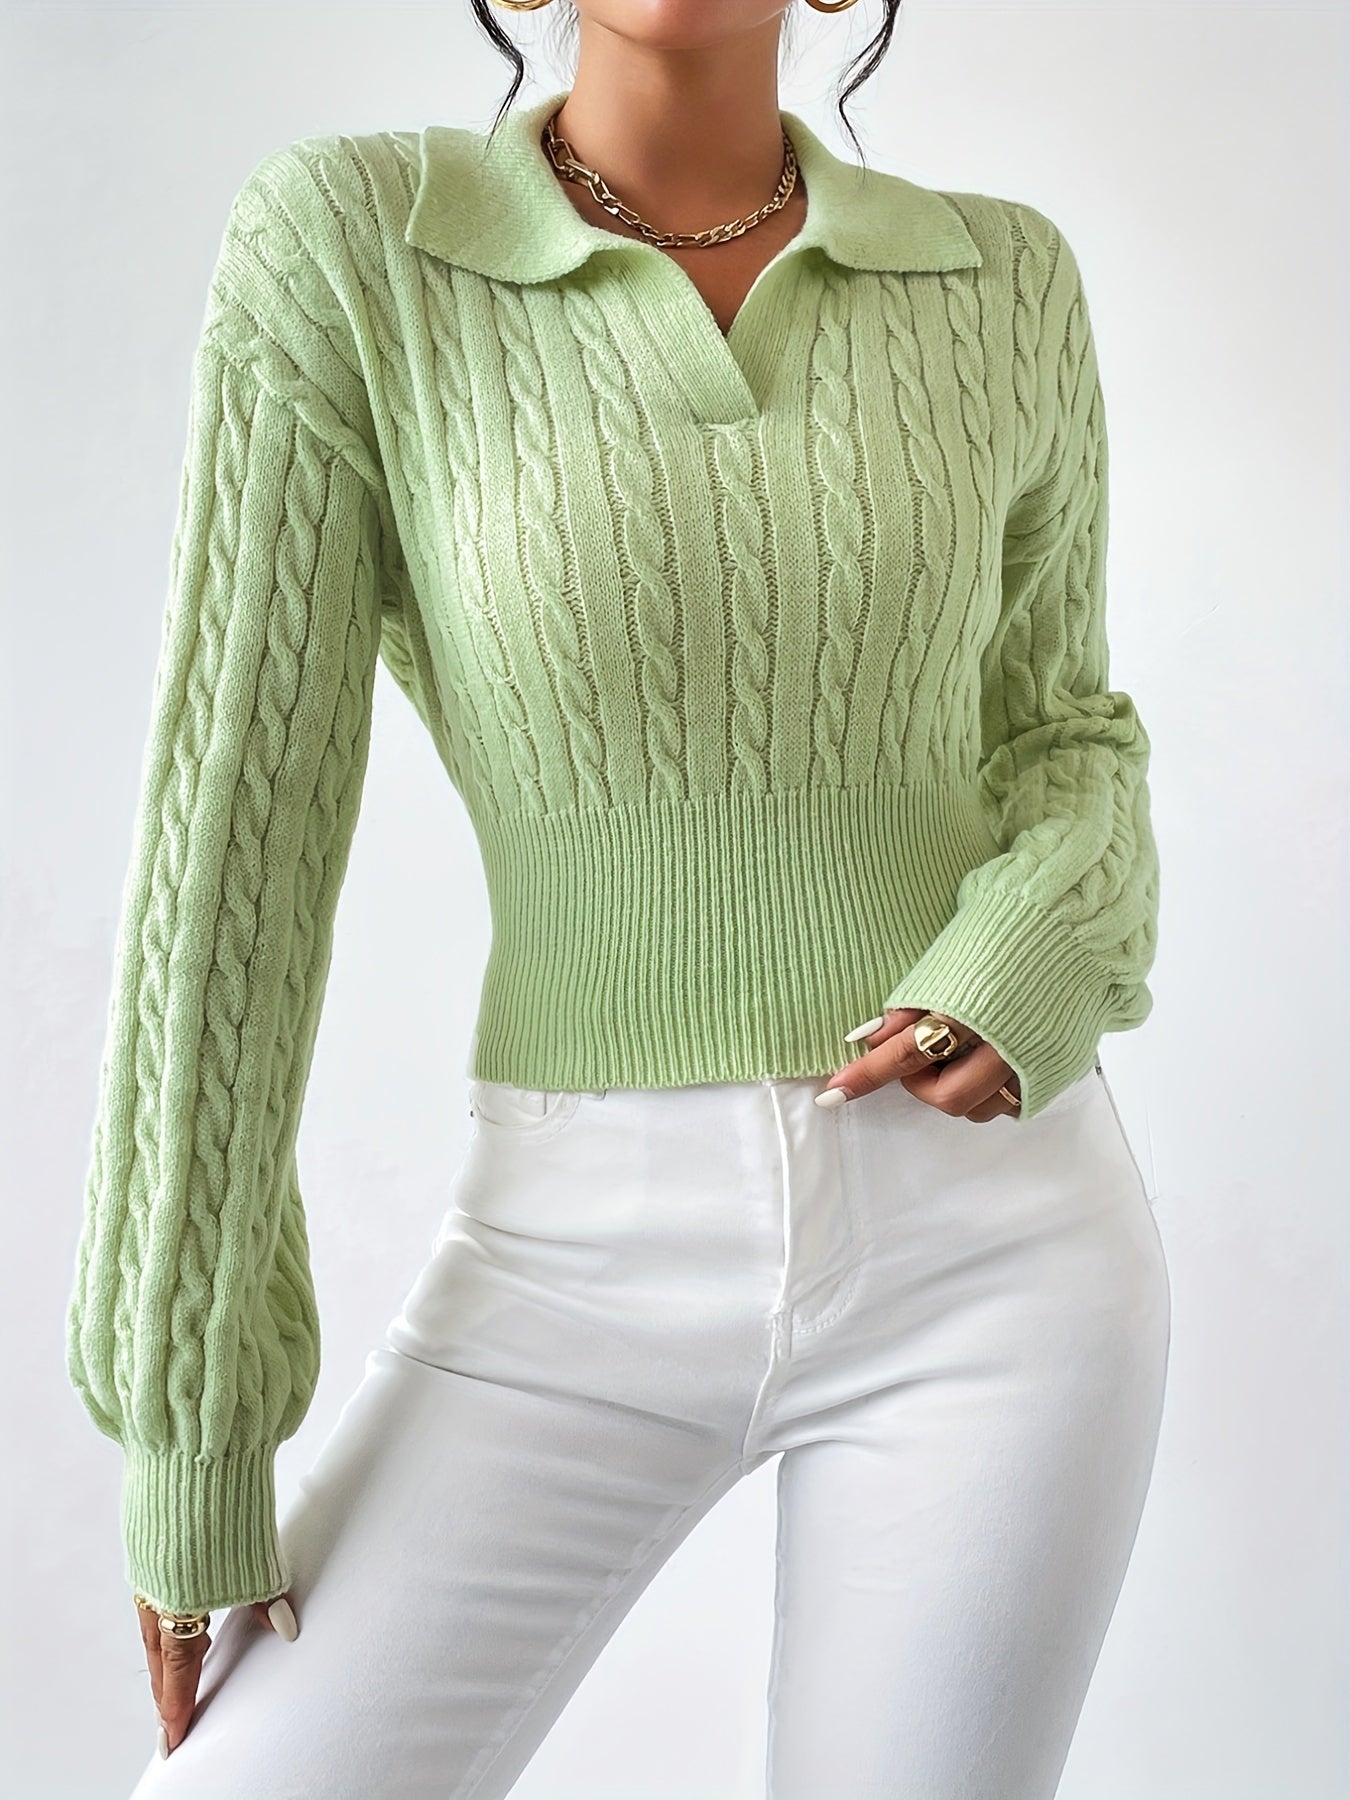 Antmvs Twist Textured V Neck Knitted Top, Casual Long Sleeve Sweater For Fall & Winter, Women's Clothing